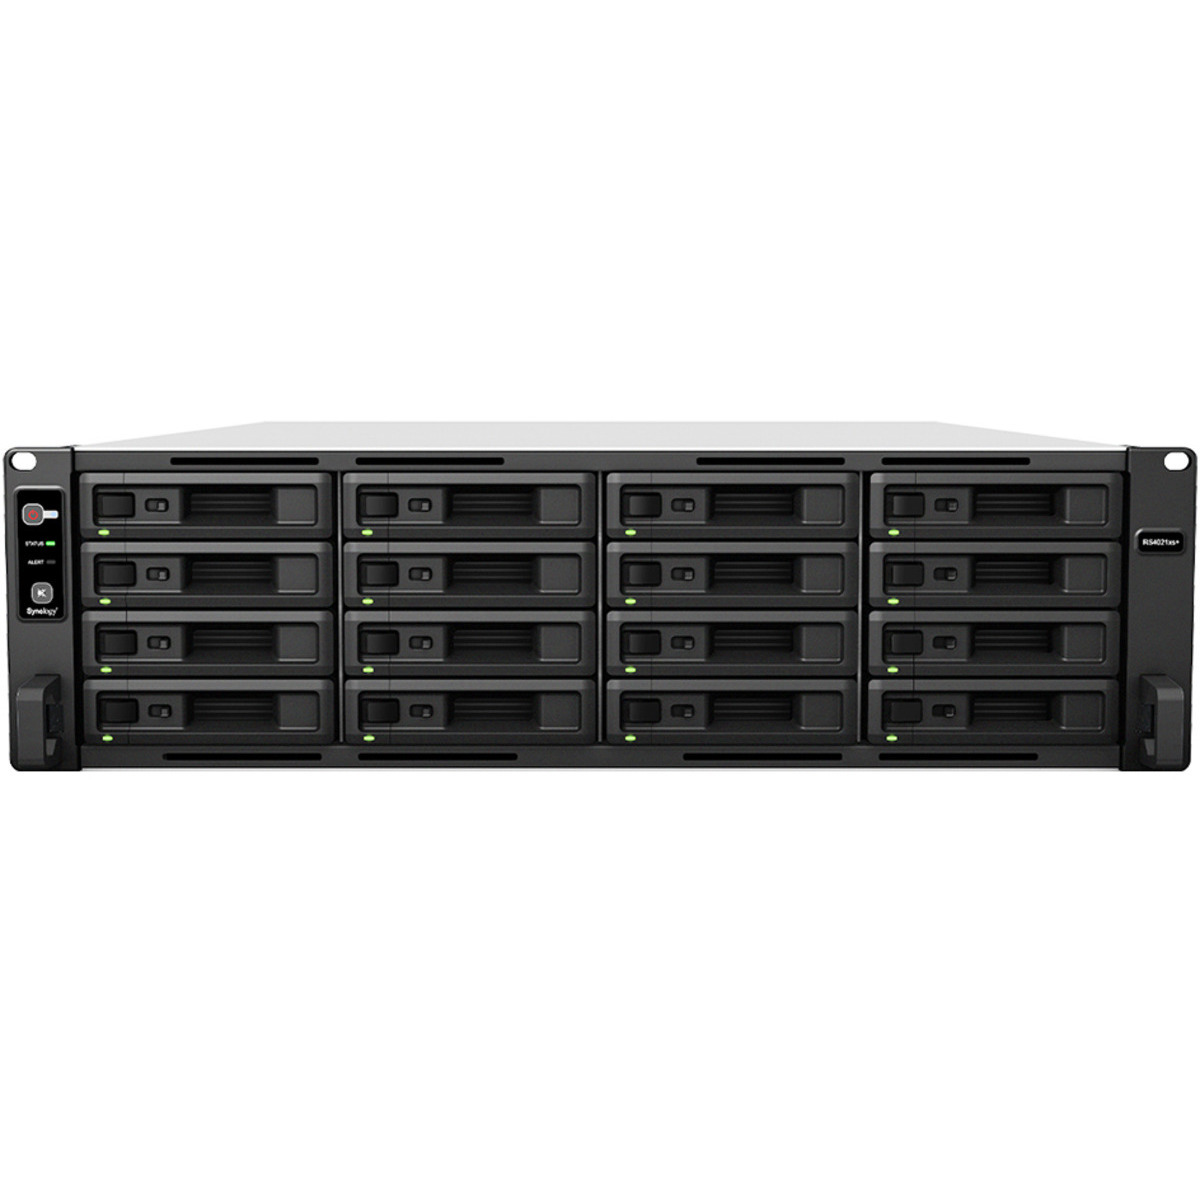 Synology RackStation RS4021xs+ 48tb 16-Bay RackMount Large Business / Enterprise NAS - Network Attached Storage Device 12x4tb Samsung 870 EVO MZ-77E4T0BAM 2.5 560/530MB/s SATA 6Gb/s SSD CONSUMER Class Drives Installed - Burn-In Tested - ON SALE RackStation RS4021xs+